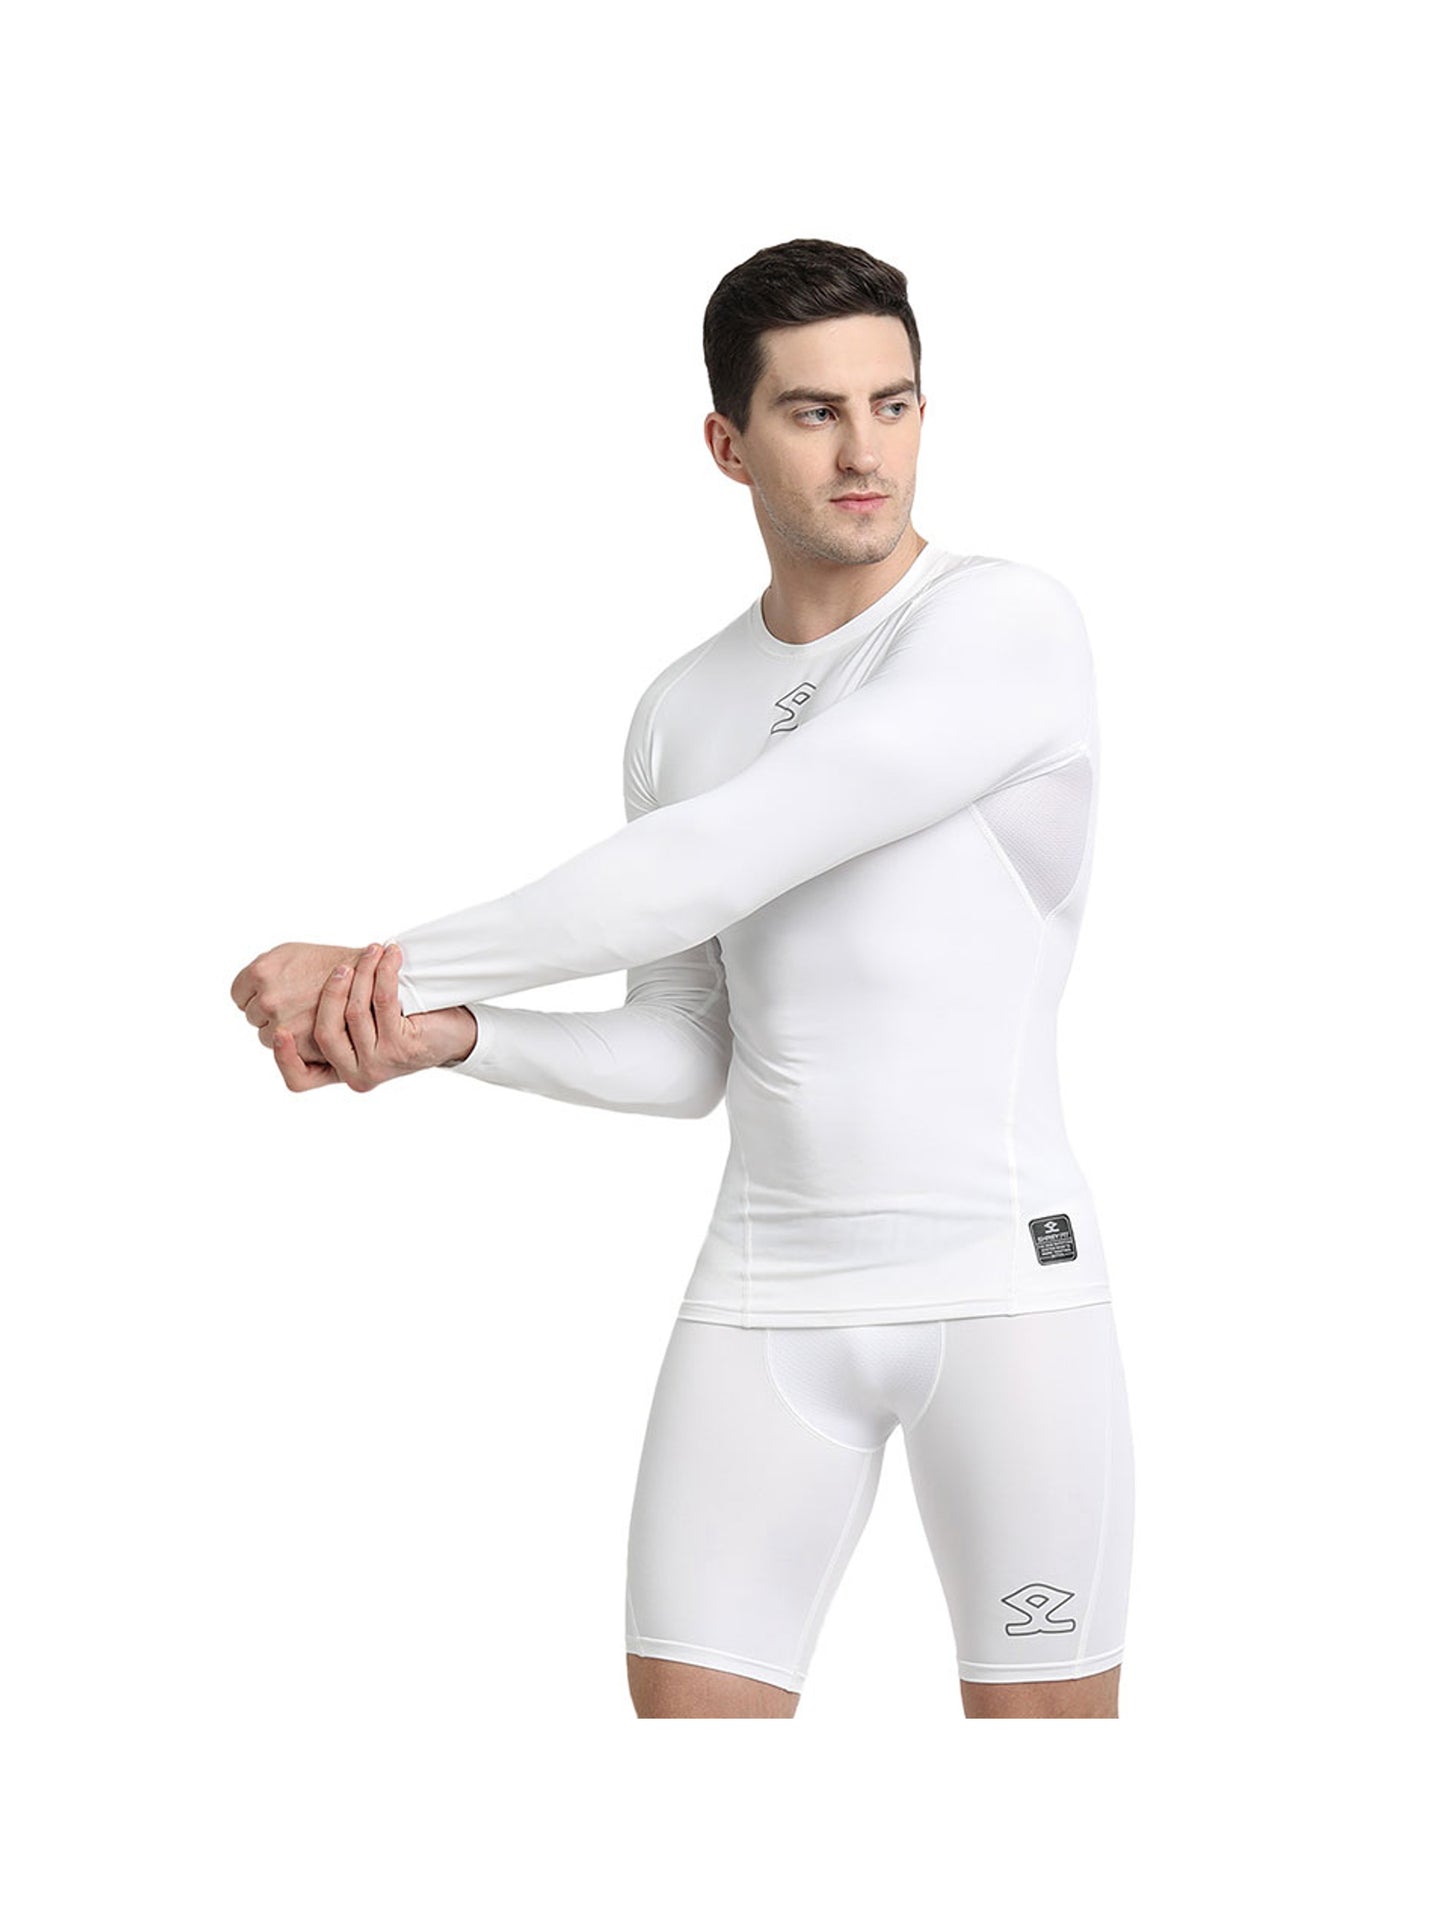 Shrey Intense Compression Long Sleeves Top